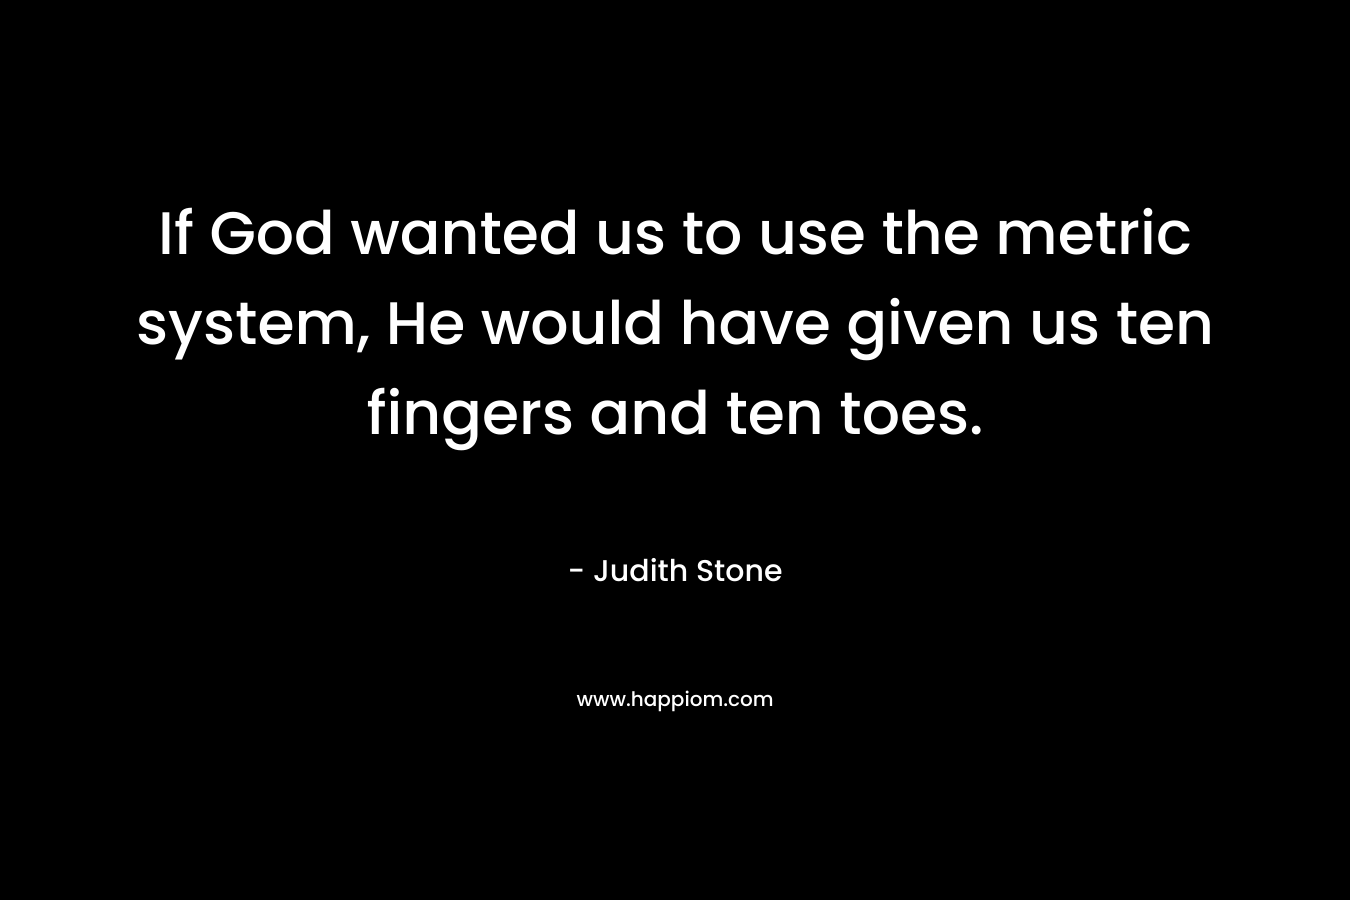 If God wanted us to use the metric system, He would have given us ten fingers and ten toes.